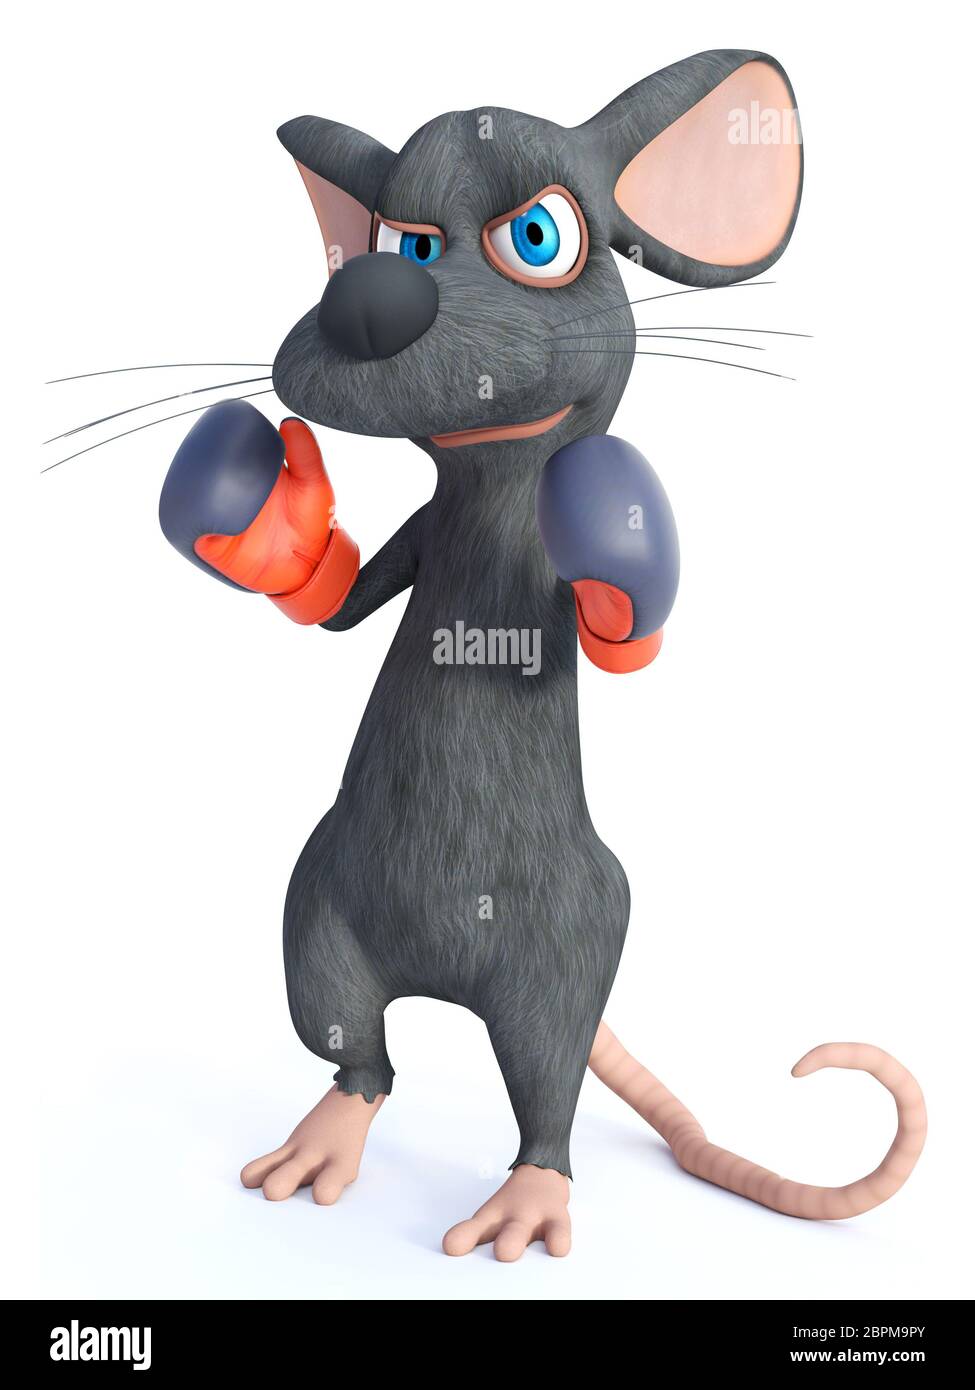 3D rendering of a cute cartoon mouse wearing boxing gloves. He looks angry, ready to fight. White background. Stock Photo